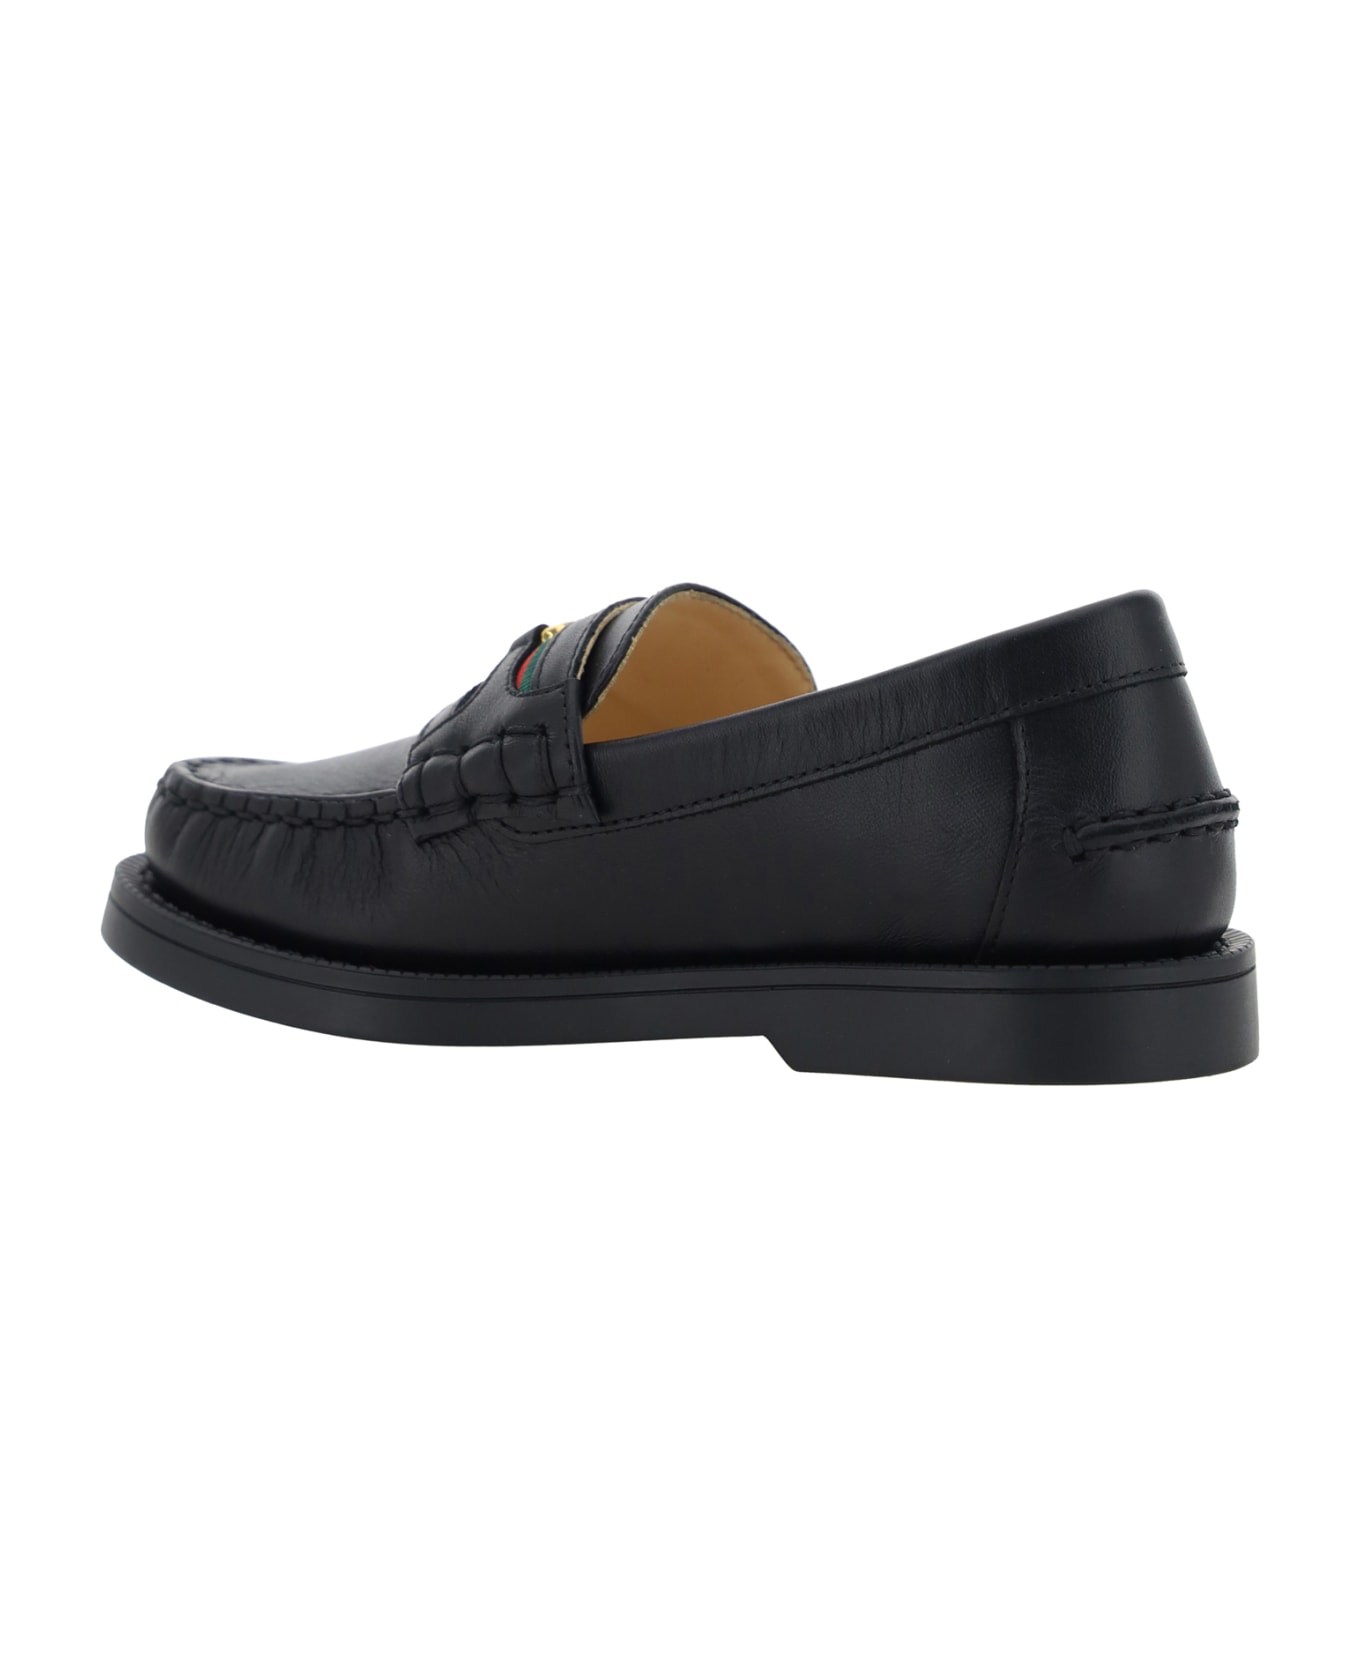 Gucci Loafers For Girl - Black